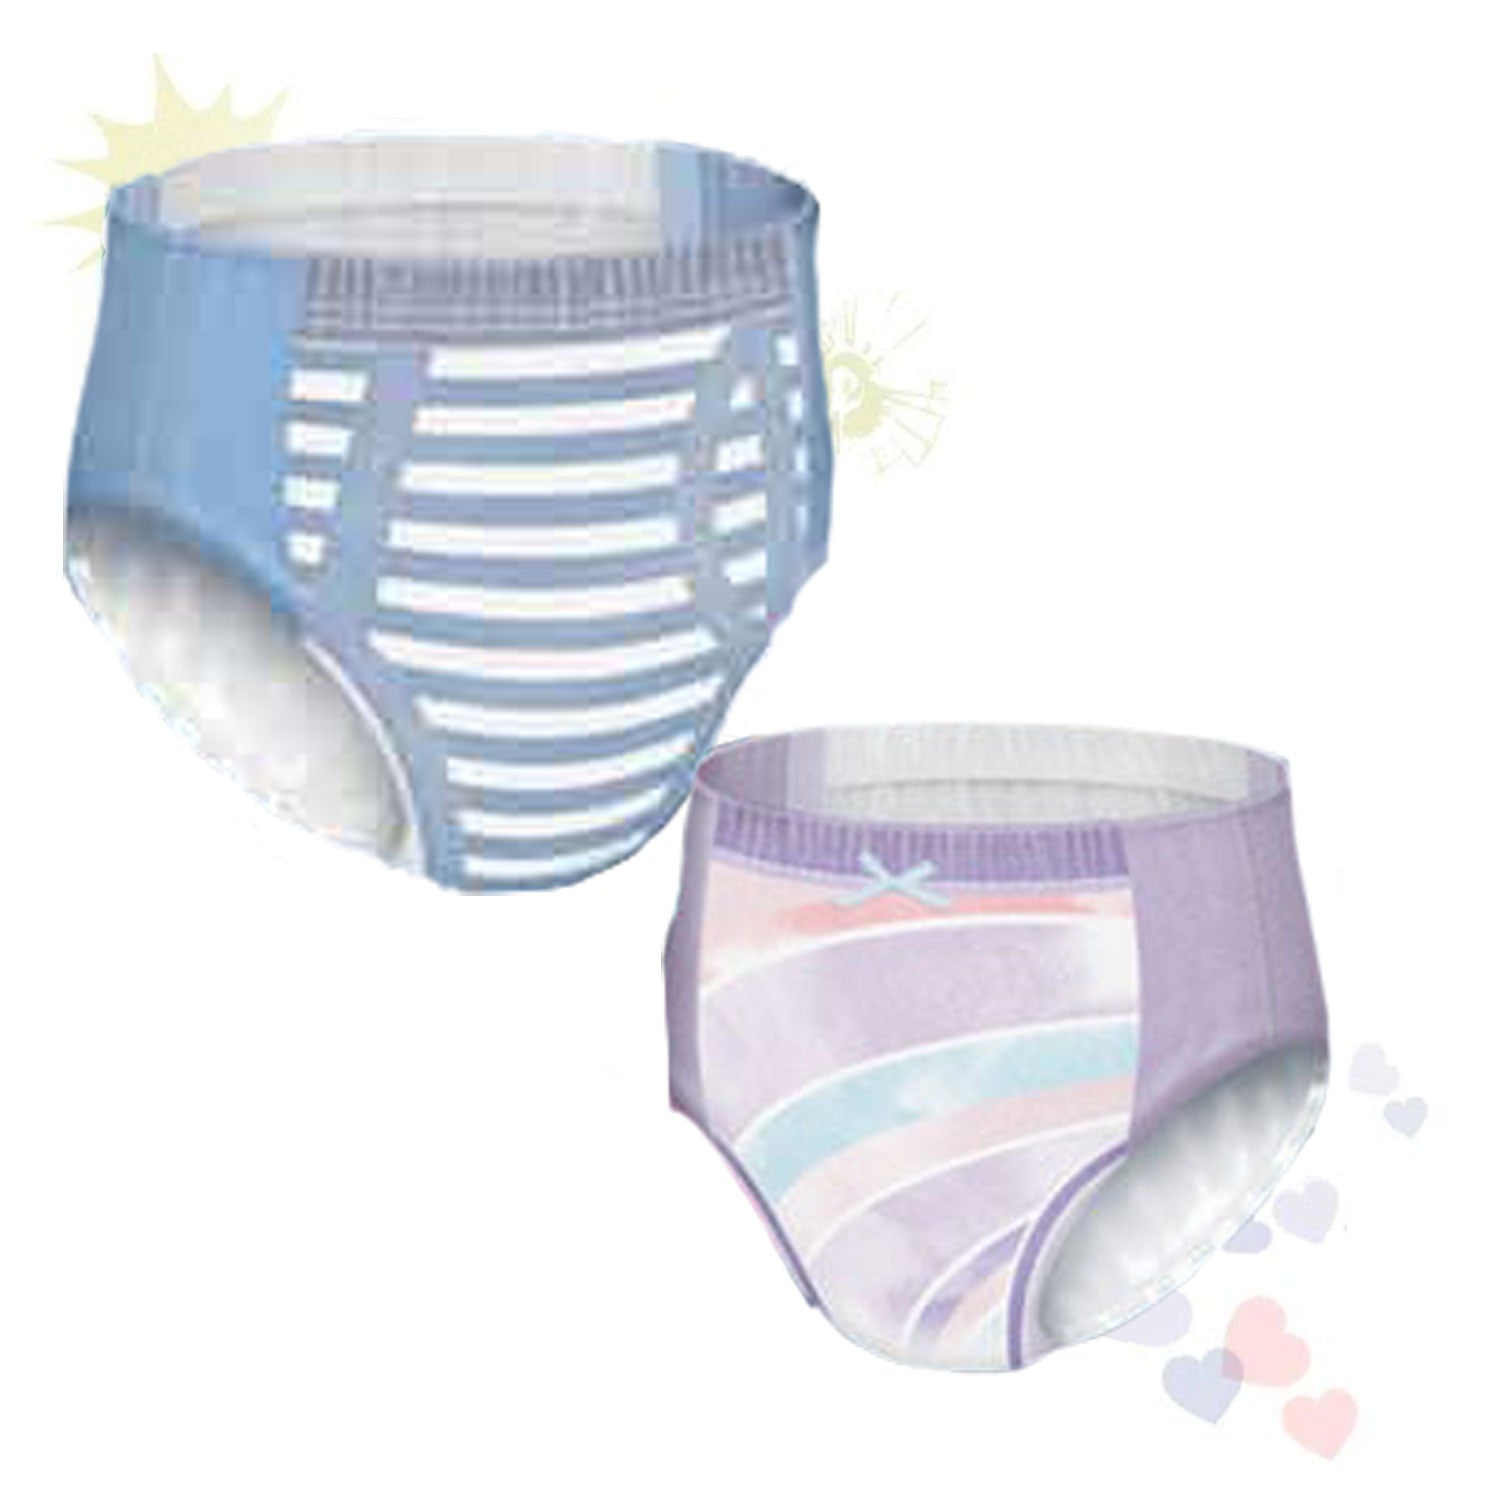 GoodNites Absorbent Nighttime Pants: Bedwetting Store